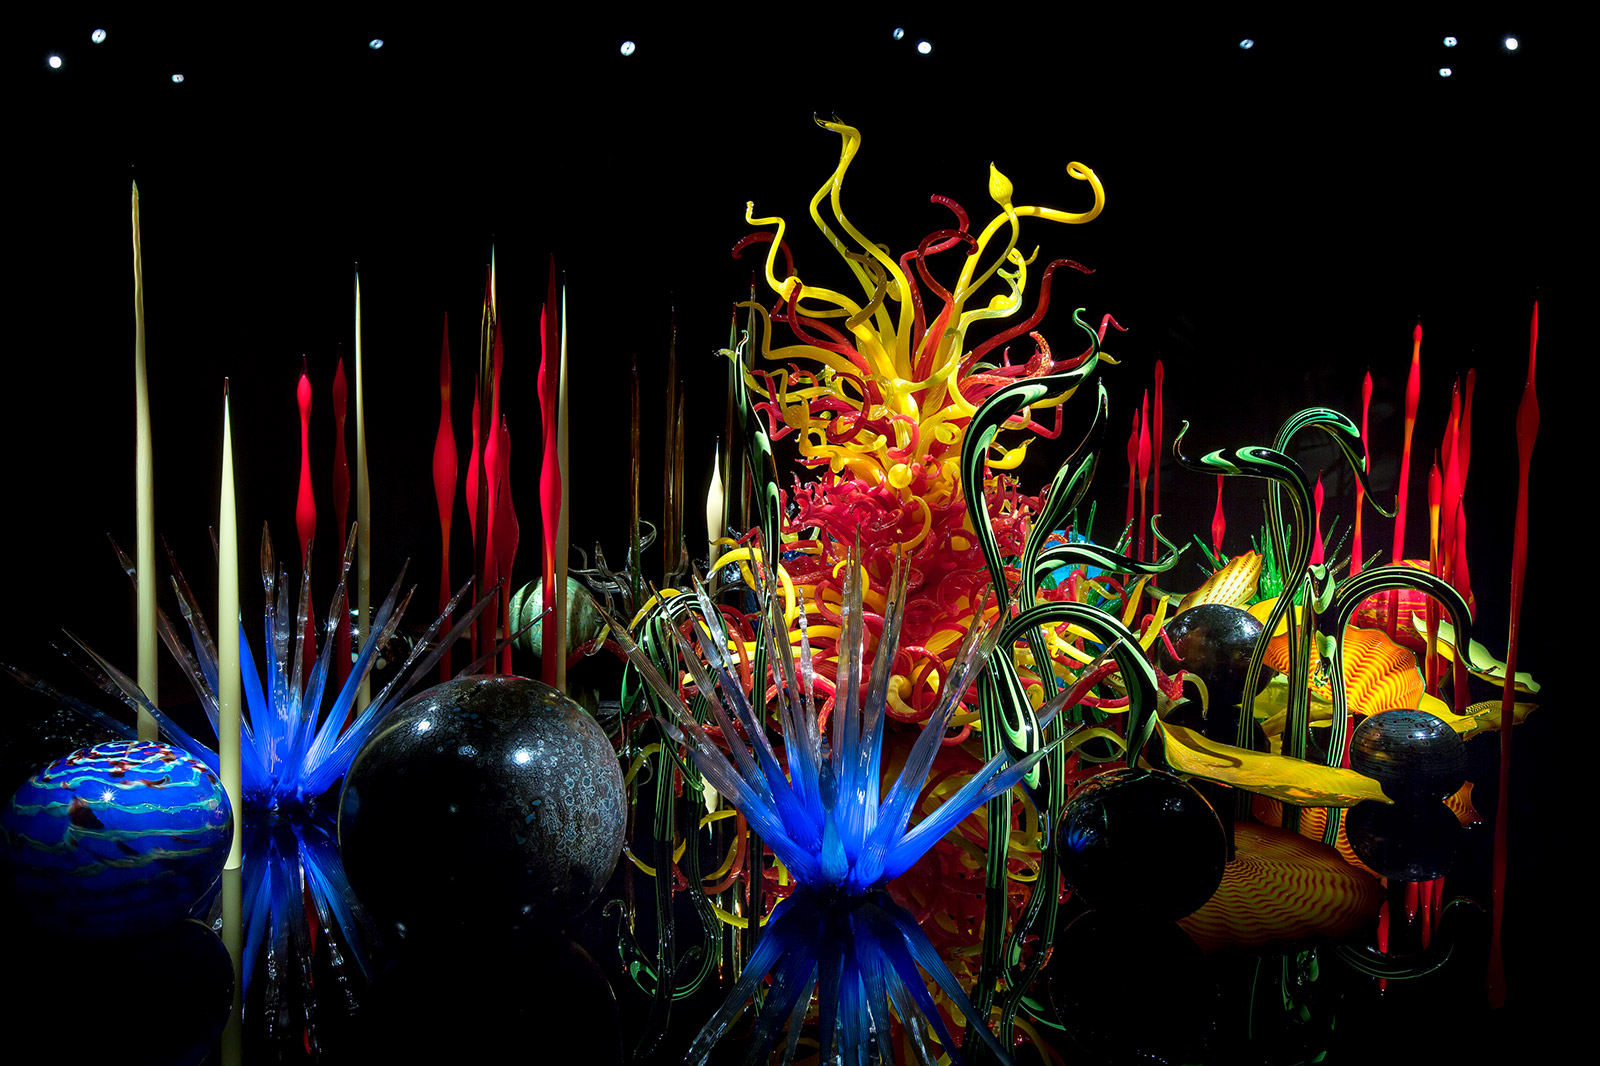 Toyama Mille Fiori, 2015, Dale Chihuly